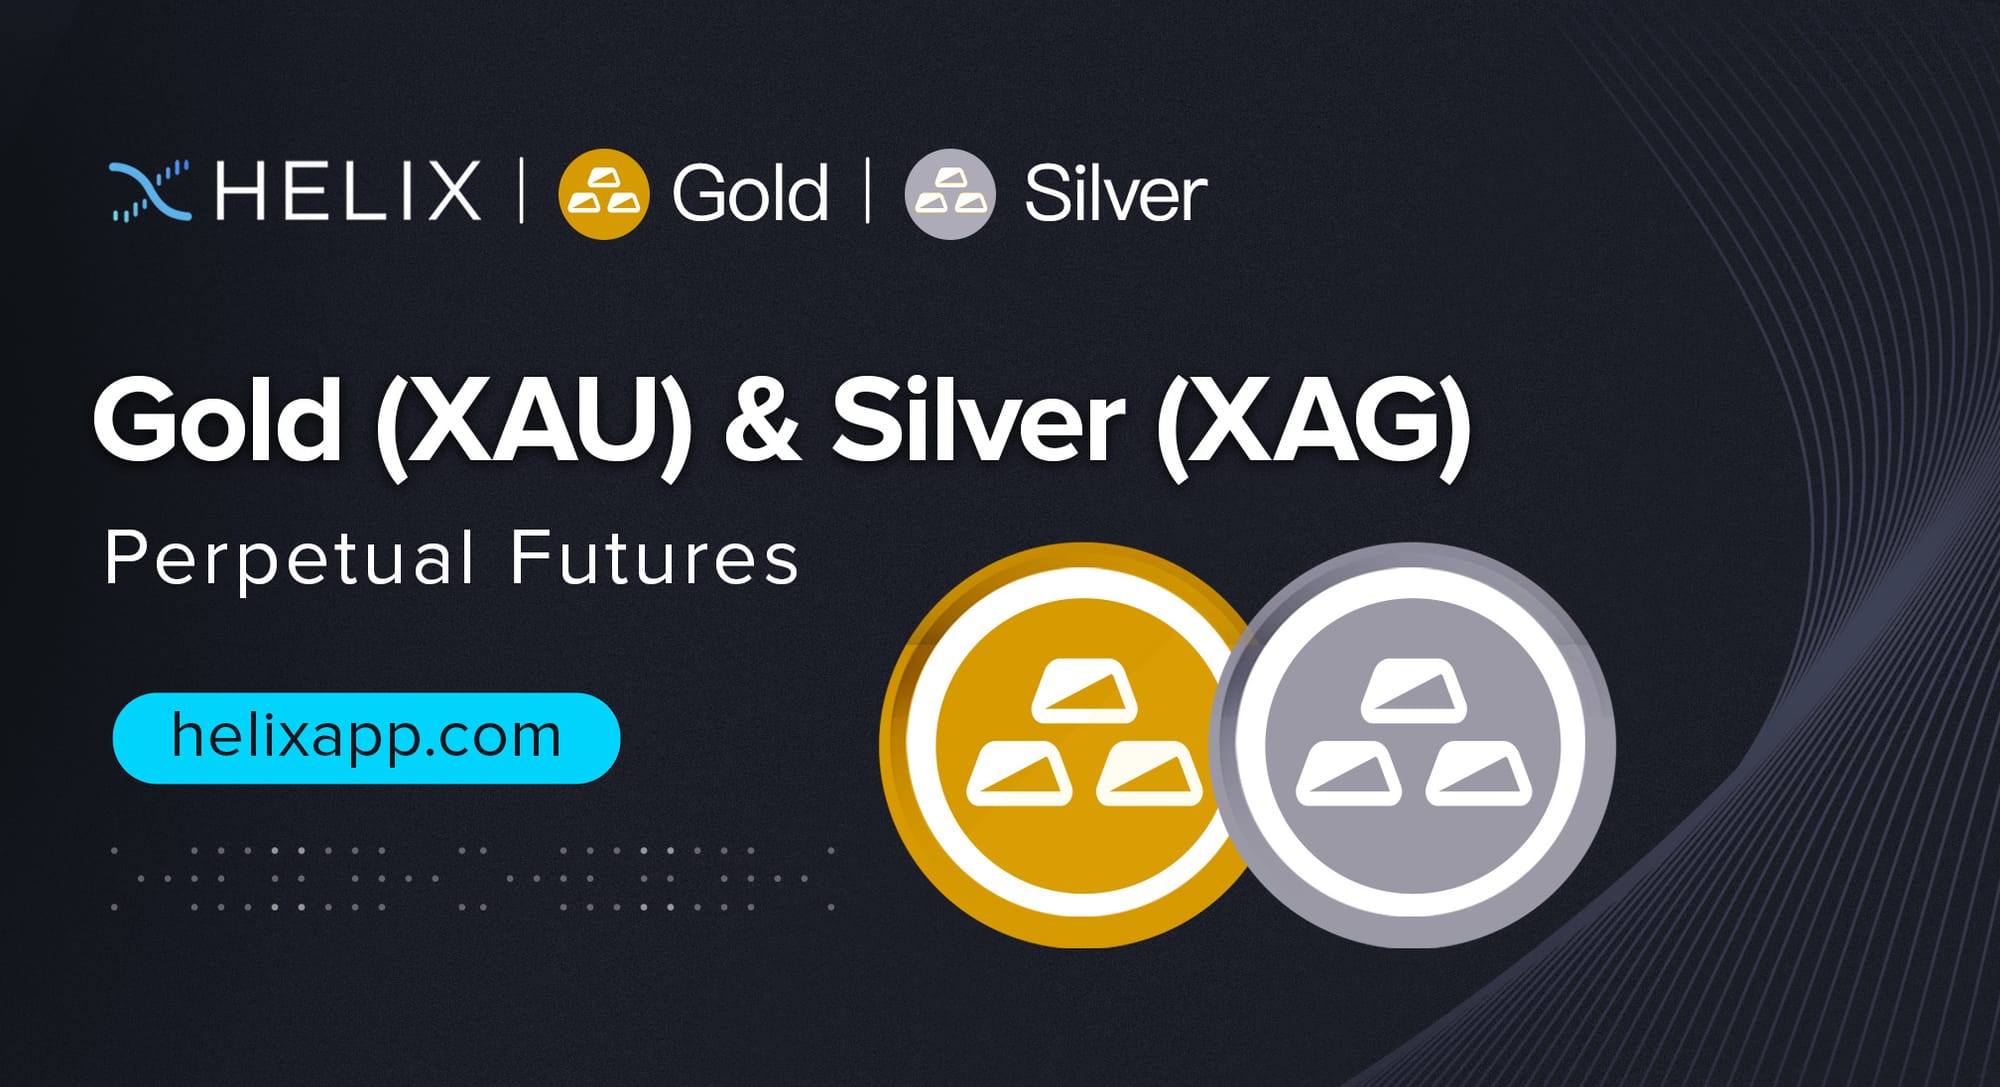 Decentralized Gold (XAU) and Silver (XAG) Perpetual Futures Listing on Helix